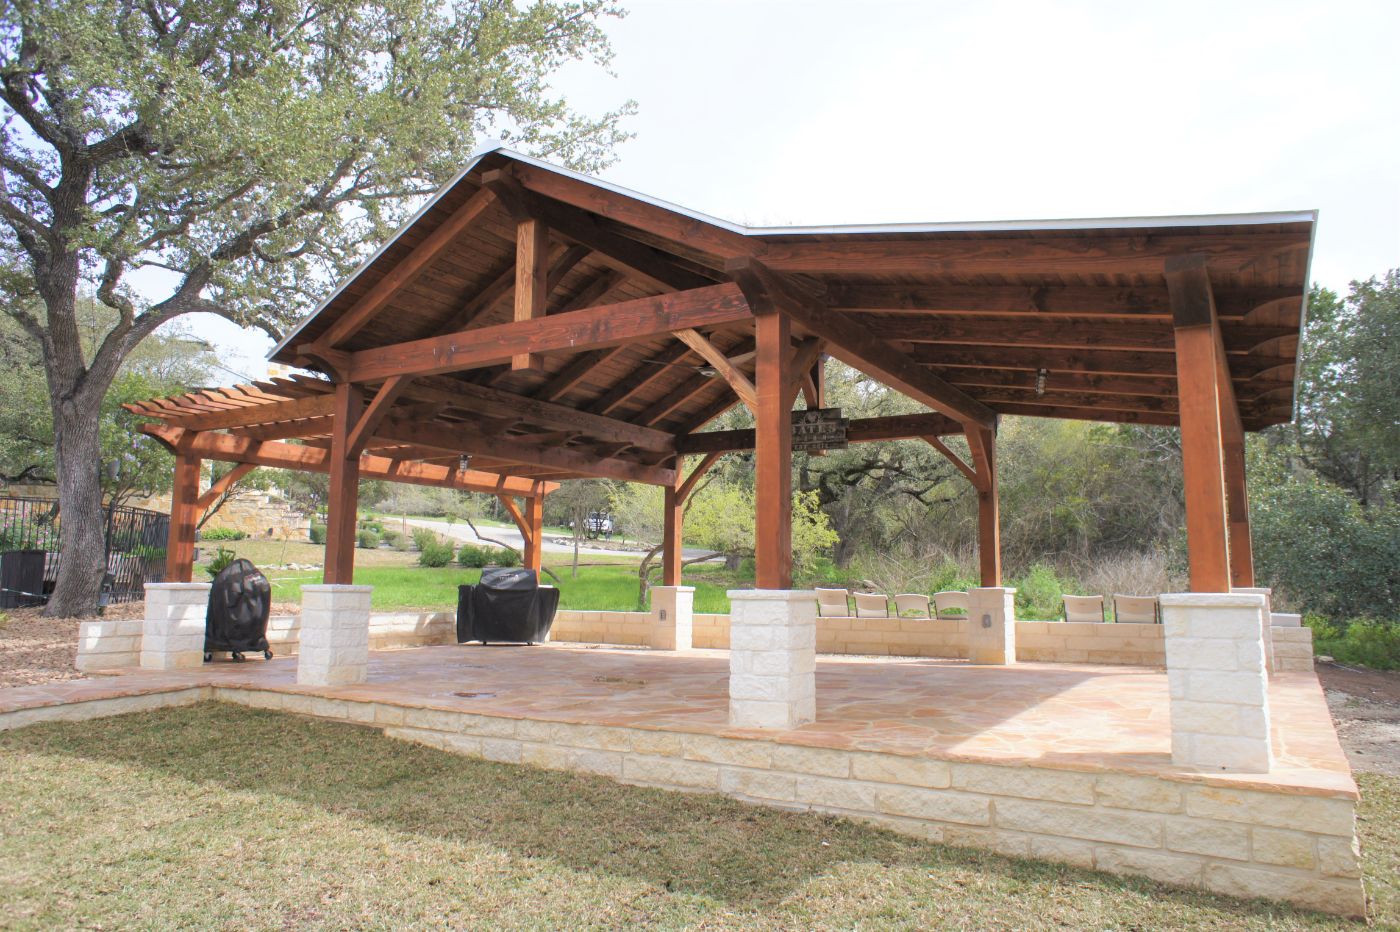 37x23, garden ridge, San Antonio, concrete or concrete pad, barbeque or grill, kitchen or outdoor kitchen, residential, covered patio, cabana, outdoor living, entertaining, shade structure, pavilion builder/contractor, cedar pavilion, post and beam